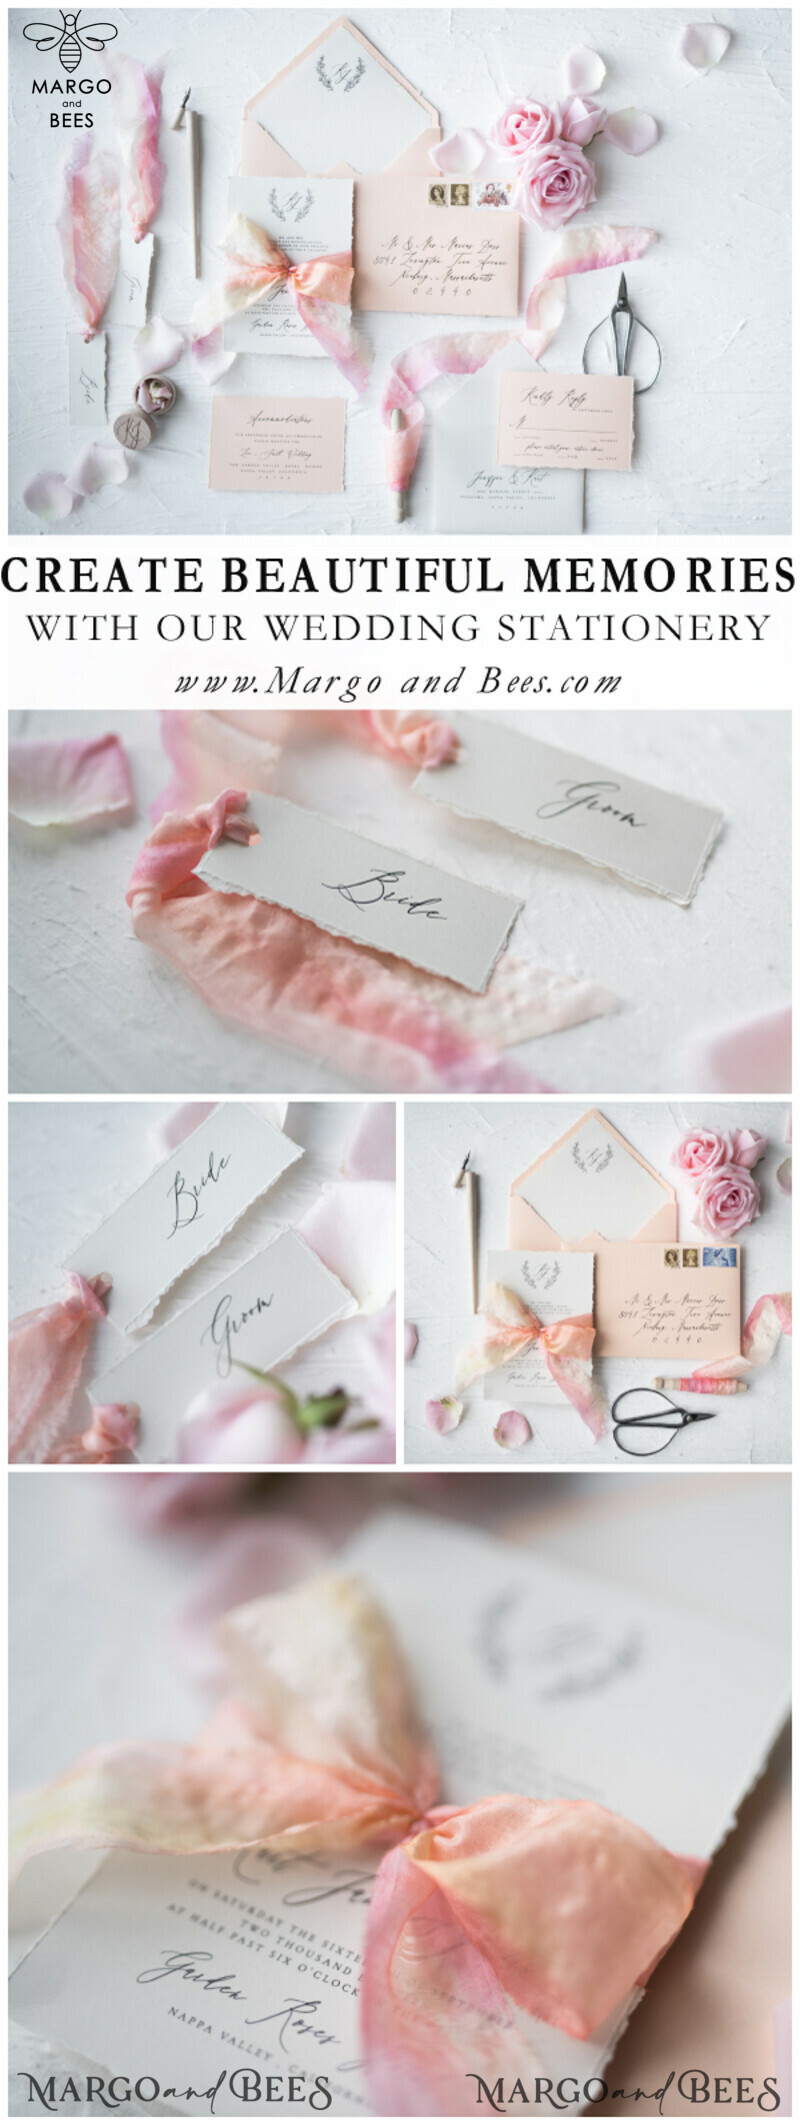 Minimalistic Peach Wedding Invitations: Elegant White Wedding Invites With Hand Dyed Ribbon and Vintage Wedding Cards - Handmade Wedding Invitation Suite-22